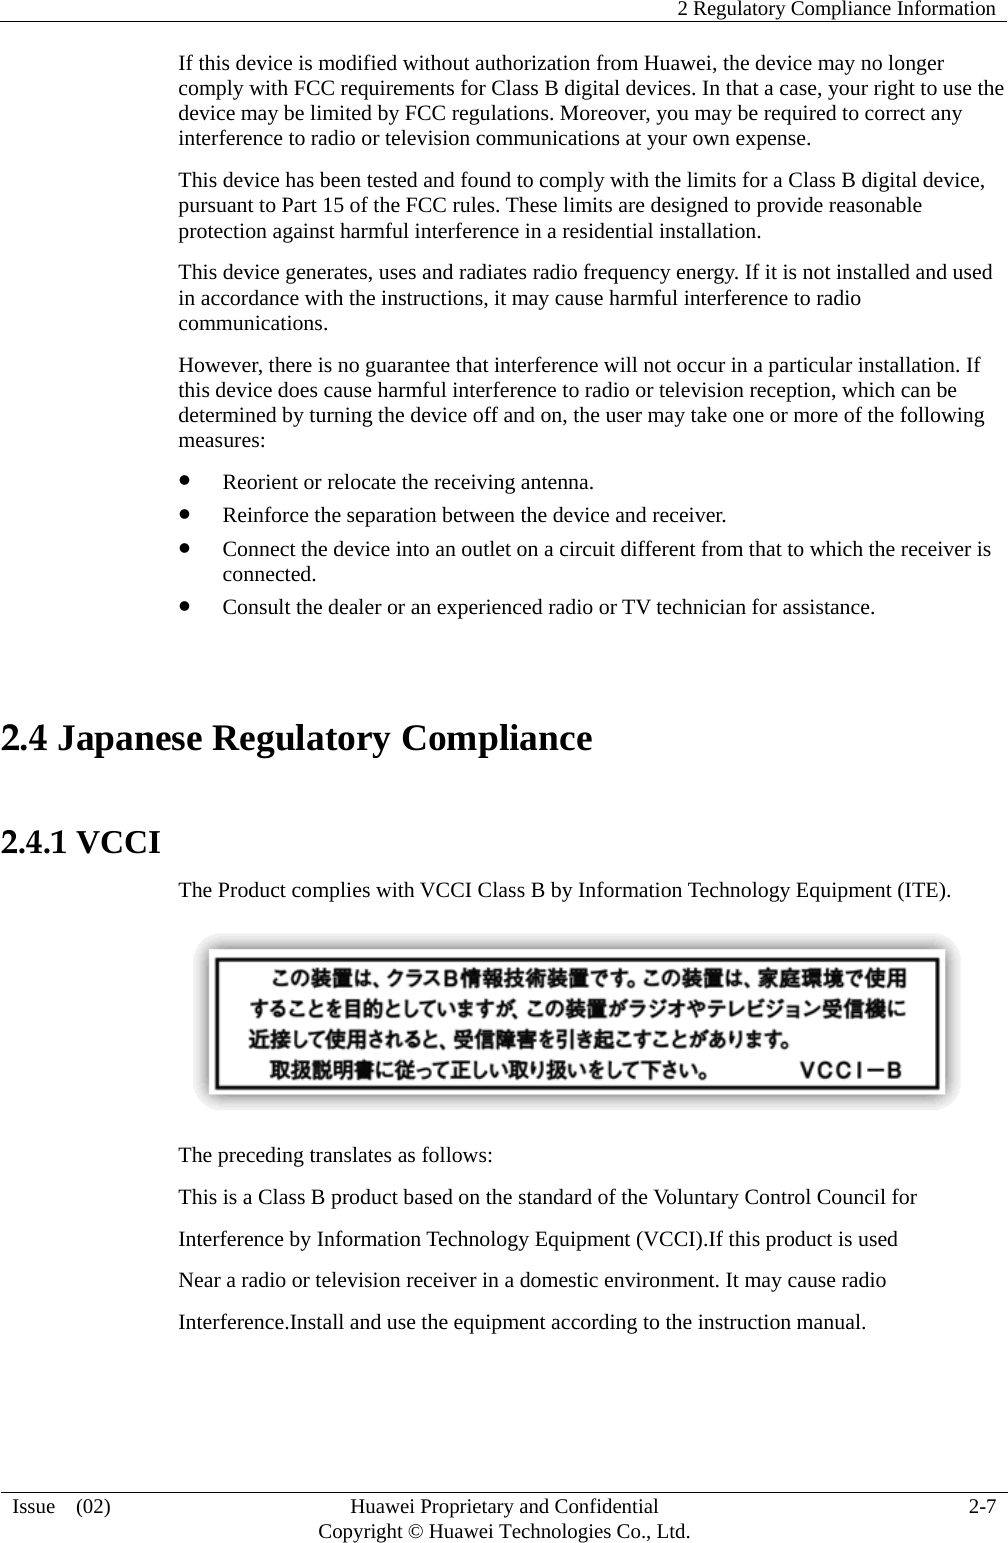    2 Regulatory Compliance Information   Issue  (02)  Huawei Proprietary and Confidential     Copyright © Huawei Technologies Co., Ltd.  2-7  If this device is modified without authorization from Huawei, the device may no longer comply with FCC requirements for Class B digital devices. In that a case, your right to use the device may be limited by FCC regulations. Moreover, you may be required to correct any interference to radio or television communications at your own expense. This device has been tested and found to comply with the limits for a Class B digital device, pursuant to Part 15 of the FCC rules. These limits are designed to provide reasonable protection against harmful interference in a residential installation. This device generates, uses and radiates radio frequency energy. If it is not installed and used in accordance with the instructions, it may cause harmful interference to radio communications. However, there is no guarantee that interference will not occur in a particular installation. If this device does cause harmful interference to radio or television reception, which can be determined by turning the device off and on, the user may take one or more of the following measures:  Reorient or relocate the receiving antenna.  Reinforce the separation between the device and receiver.  Connect the device into an outlet on a circuit different from that to which the receiver is connected.  Consult the dealer or an experienced radio or TV technician for assistance.  2.4 Japanese Regulatory Compliance  2.4.1 VCCI The Product complies with VCCI Class B by Information Technology Equipment (ITE).  The preceding translates as follows: This is a Class B product based on the standard of the Voluntary Control Council for Interference by Information Technology Equipment (VCCI).If this product is used Near a radio or television receiver in a domestic environment. It may cause radio Interference.Install and use the equipment according to the instruction manual.   